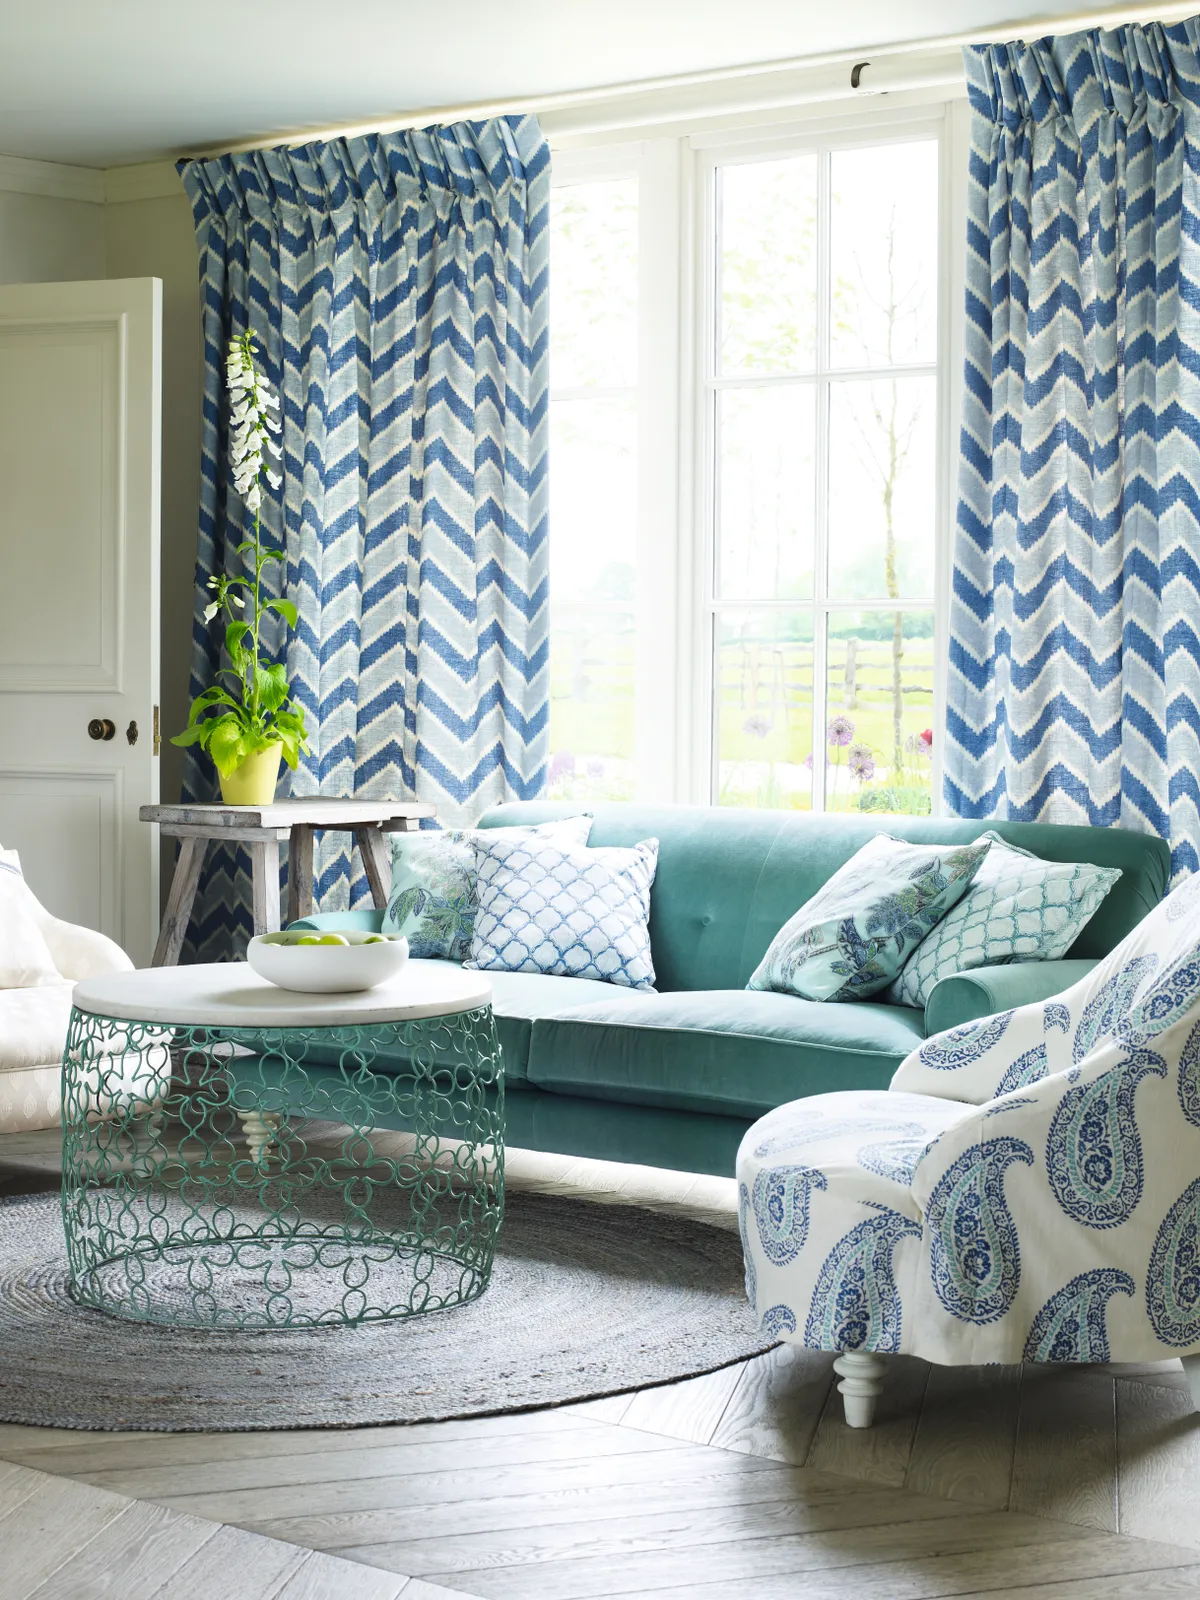 A teal velvet sofa infront of zigzag print blue curtains